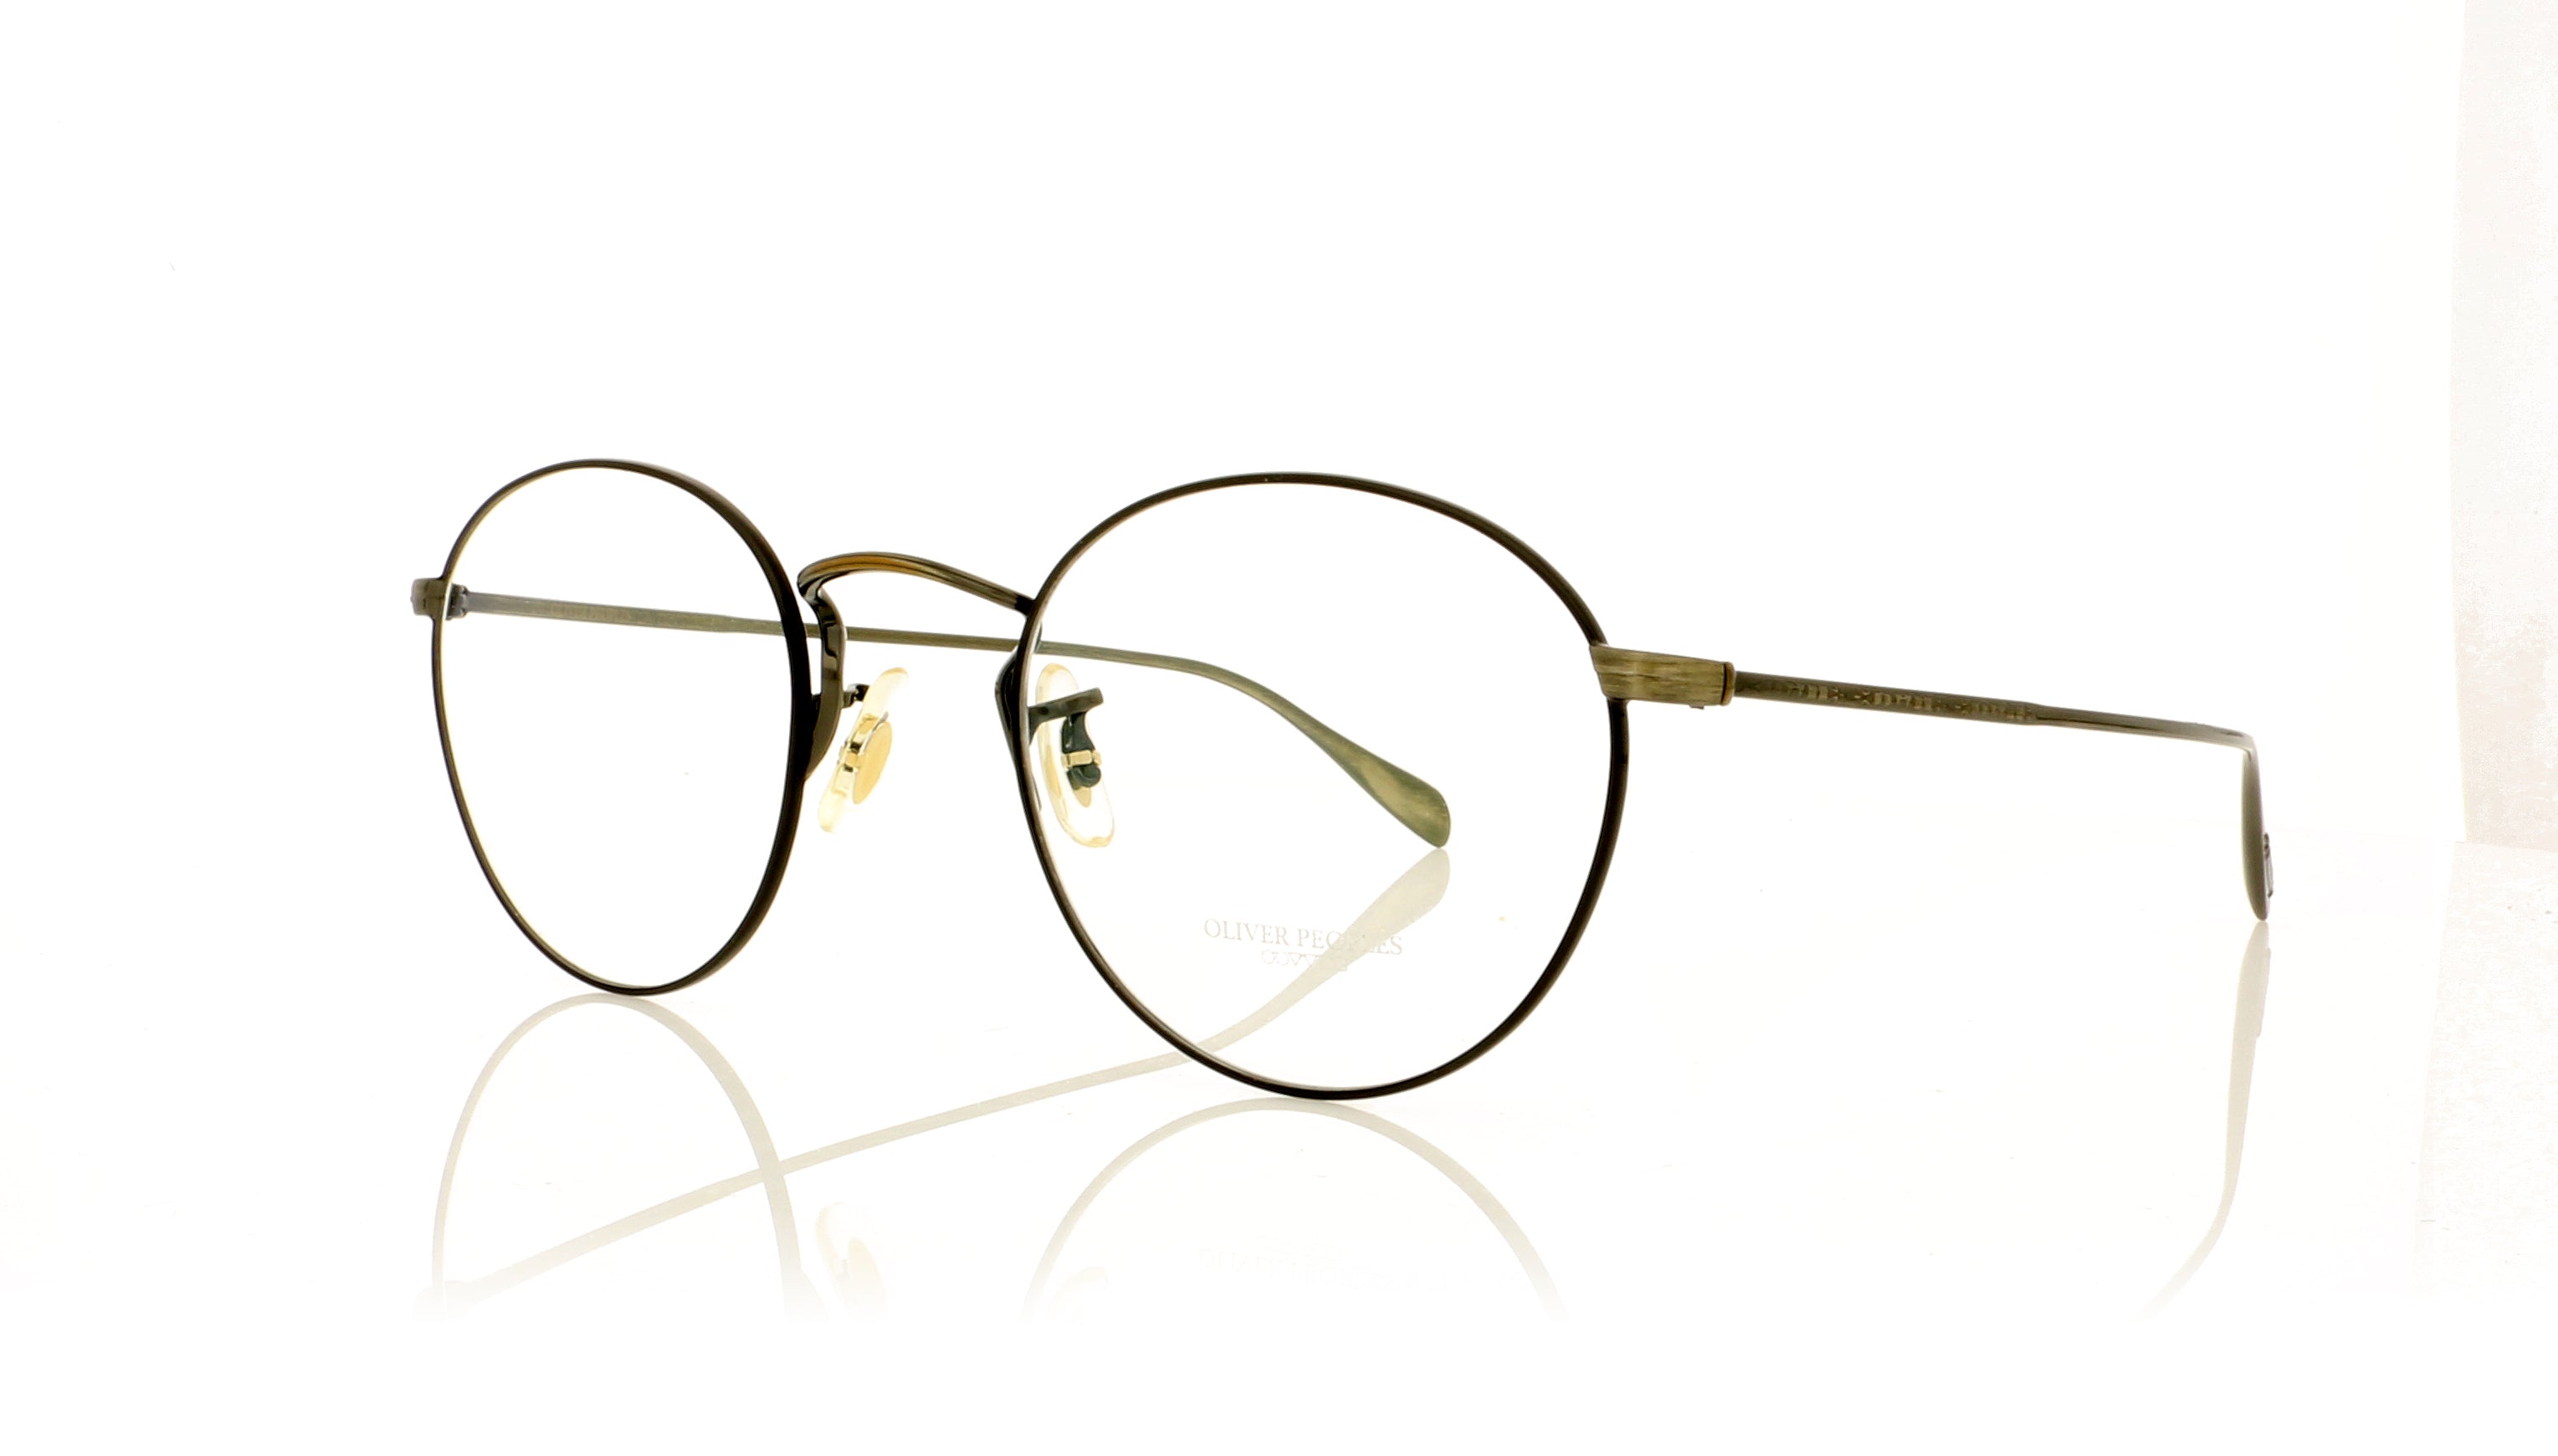 Oliver Peoples Coleridge 5296 New Antique Gold Glasses | The Eye Place